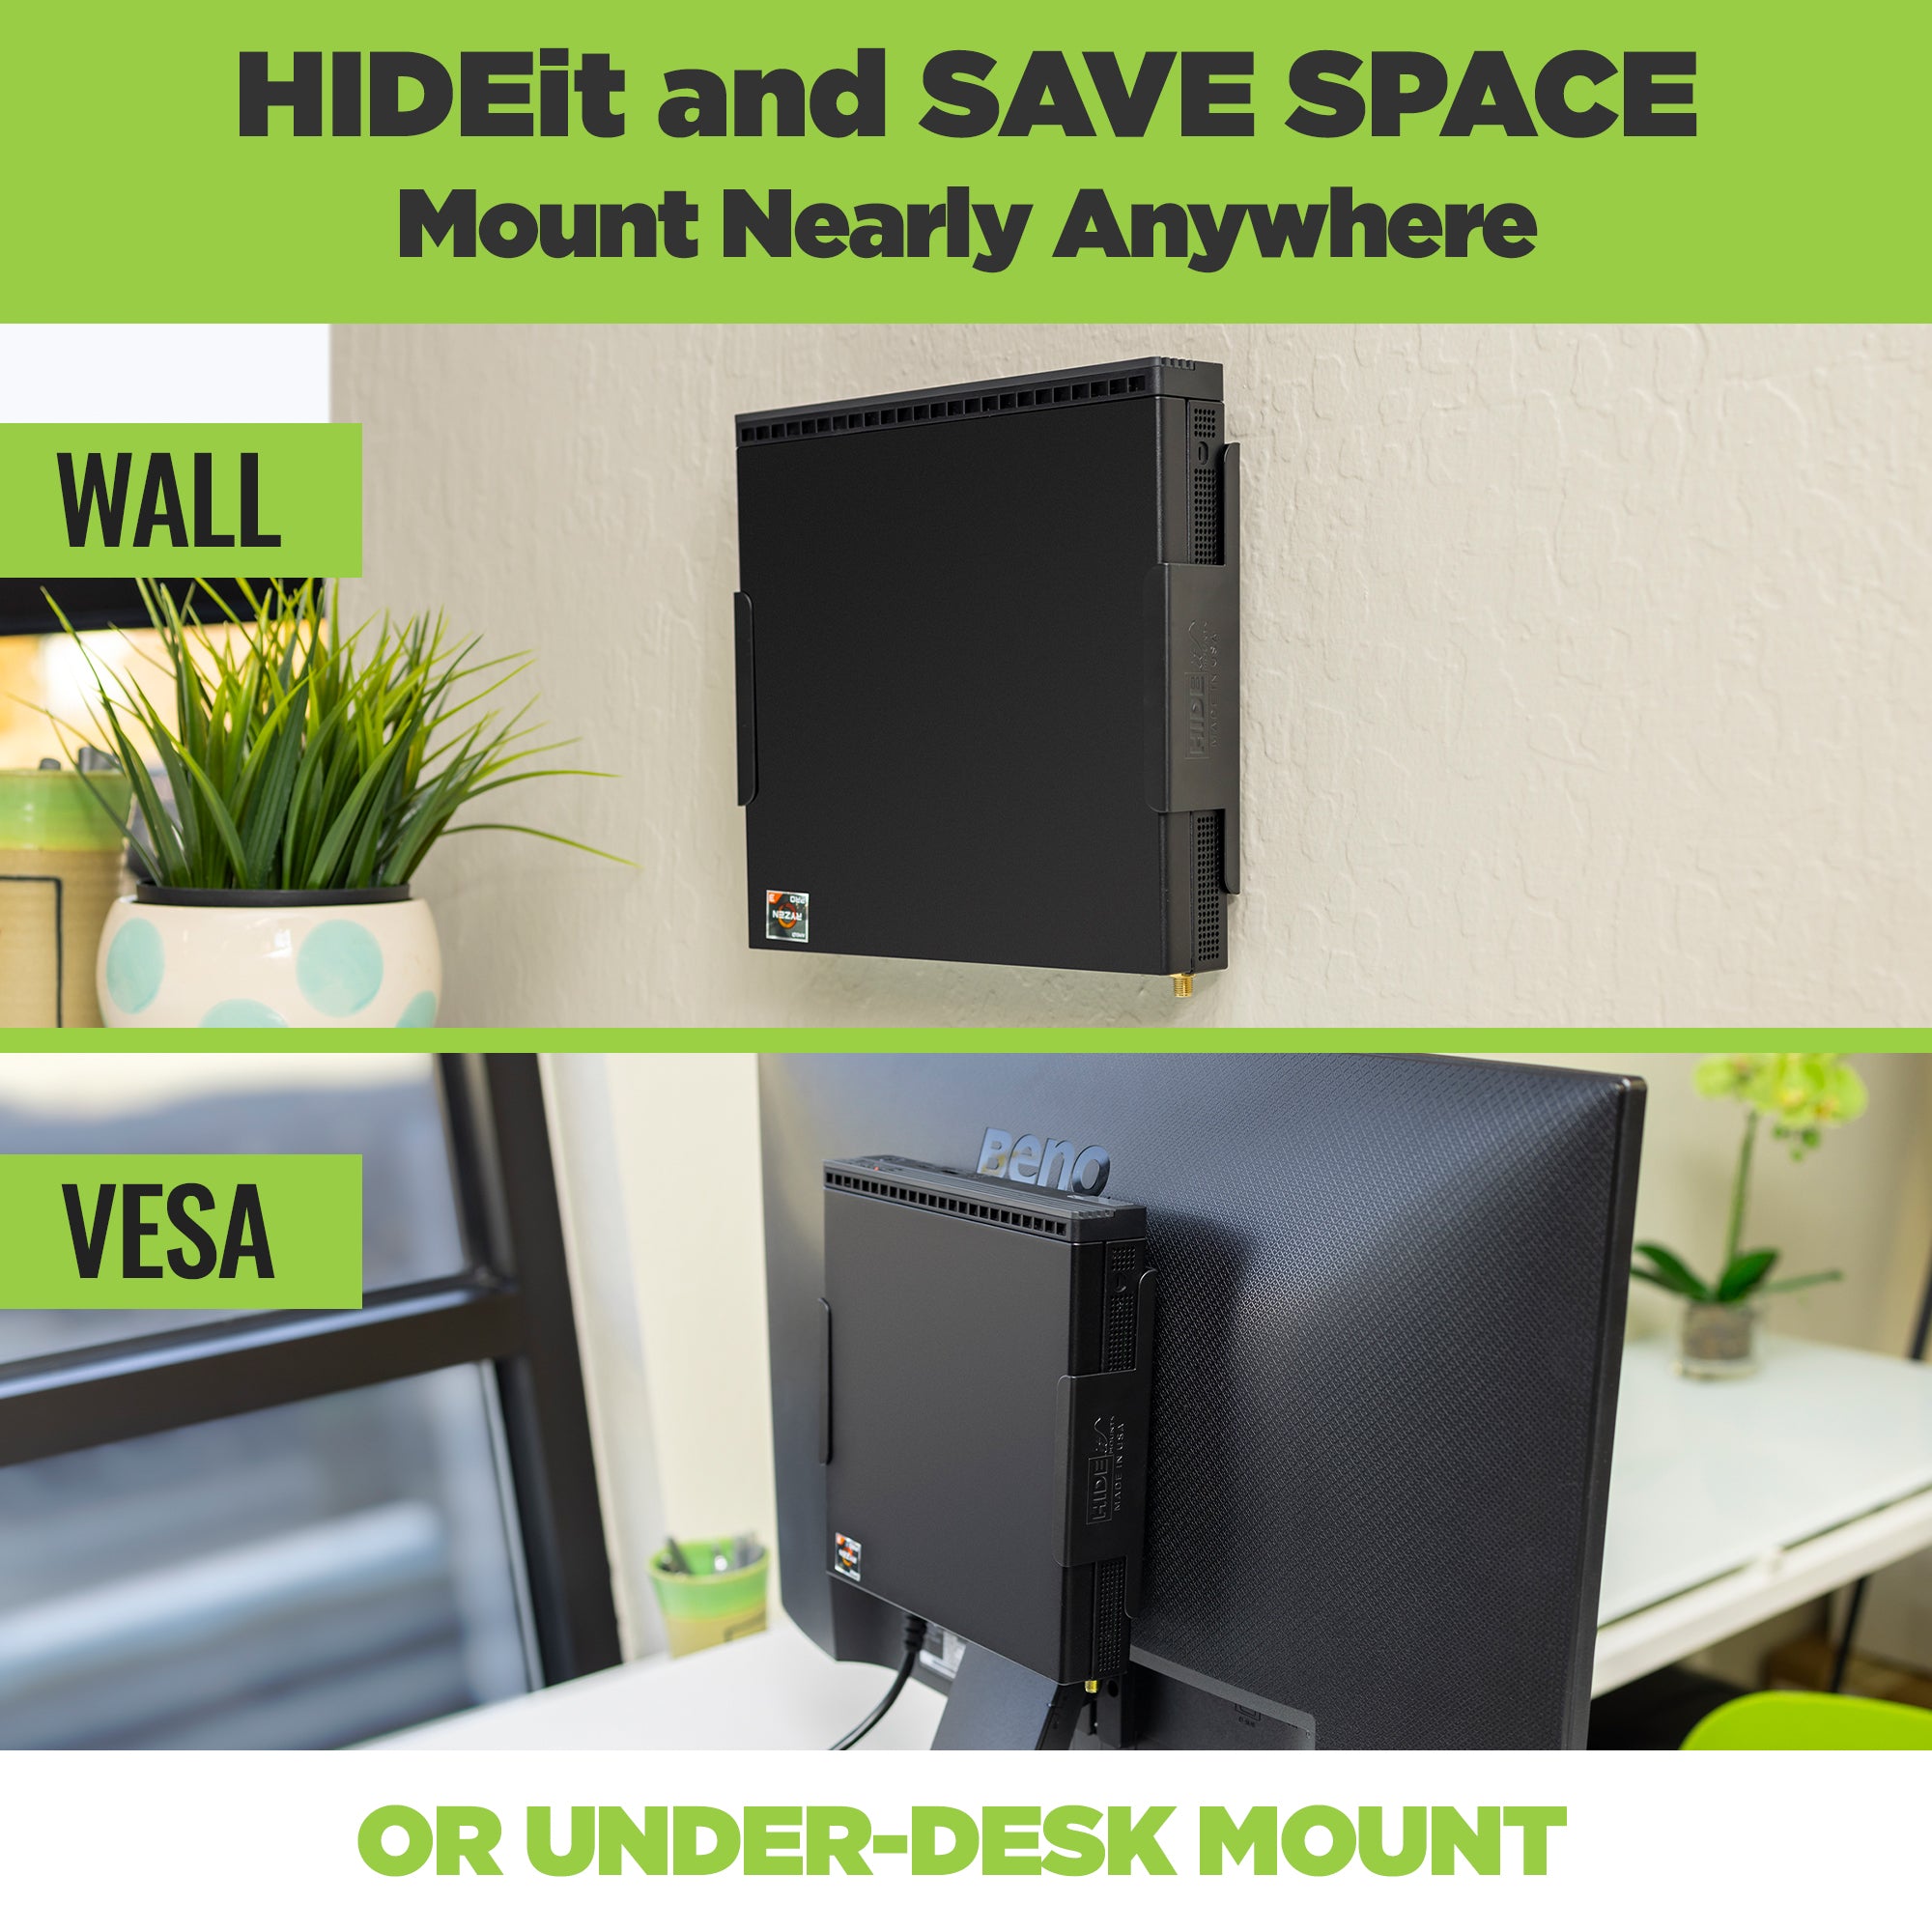 The HIDEit Mount for the Lenovo ThinkCentre M Series PC can we wall mounted, VESA mounted or under-desk mounted. 